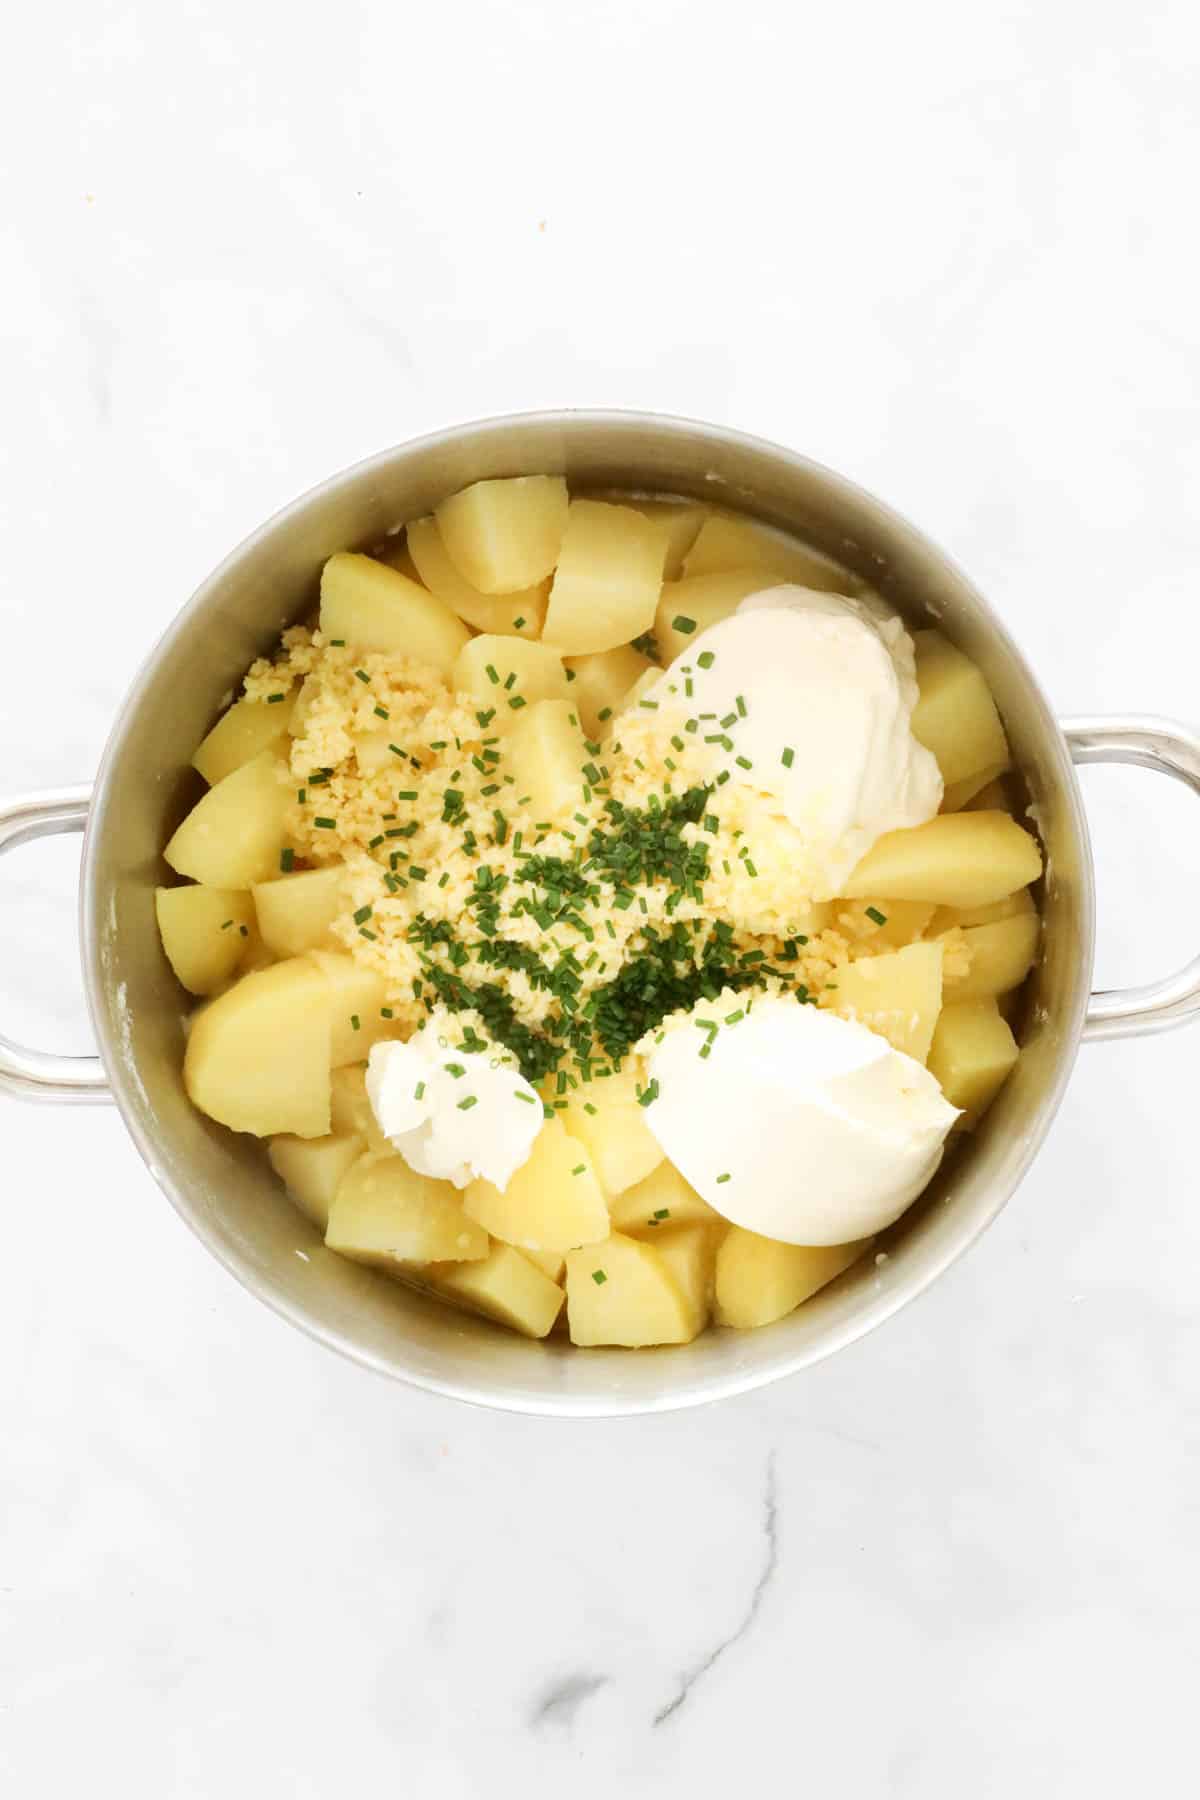 Sour cream, grated cheese and chopped chives added to a saucepan filled with cooked potatoes.